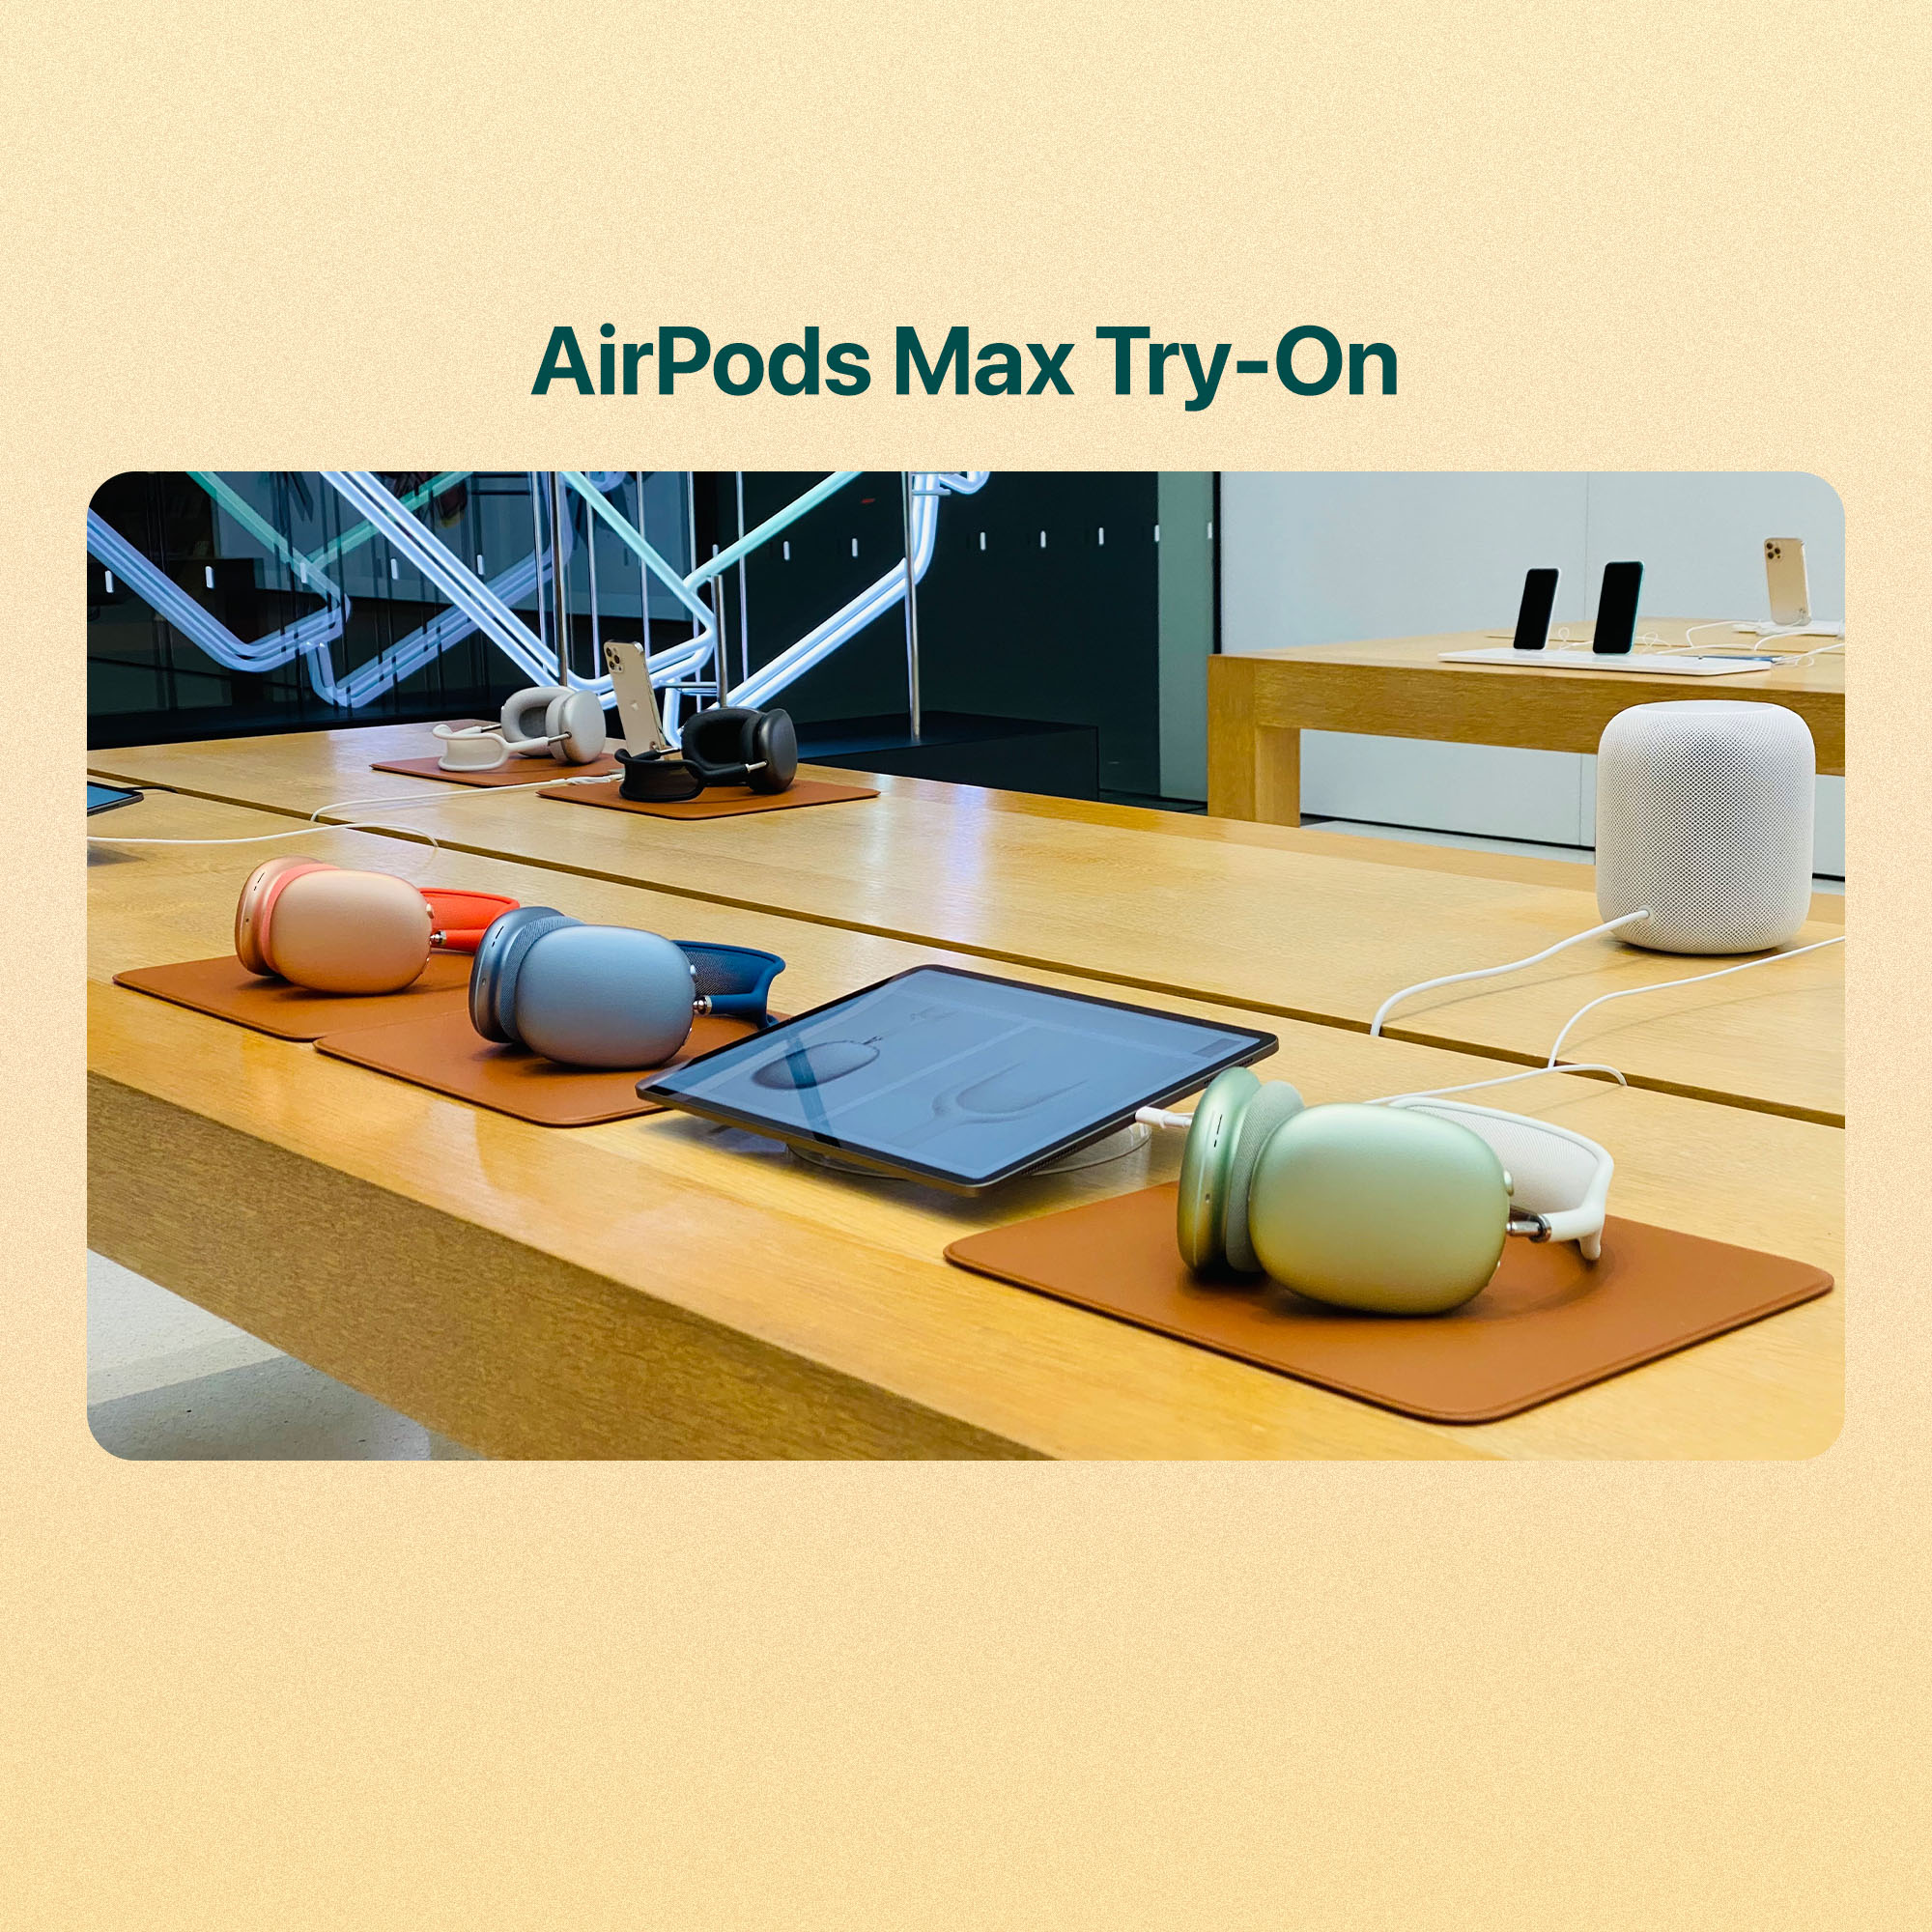 AirPods Max Try-On